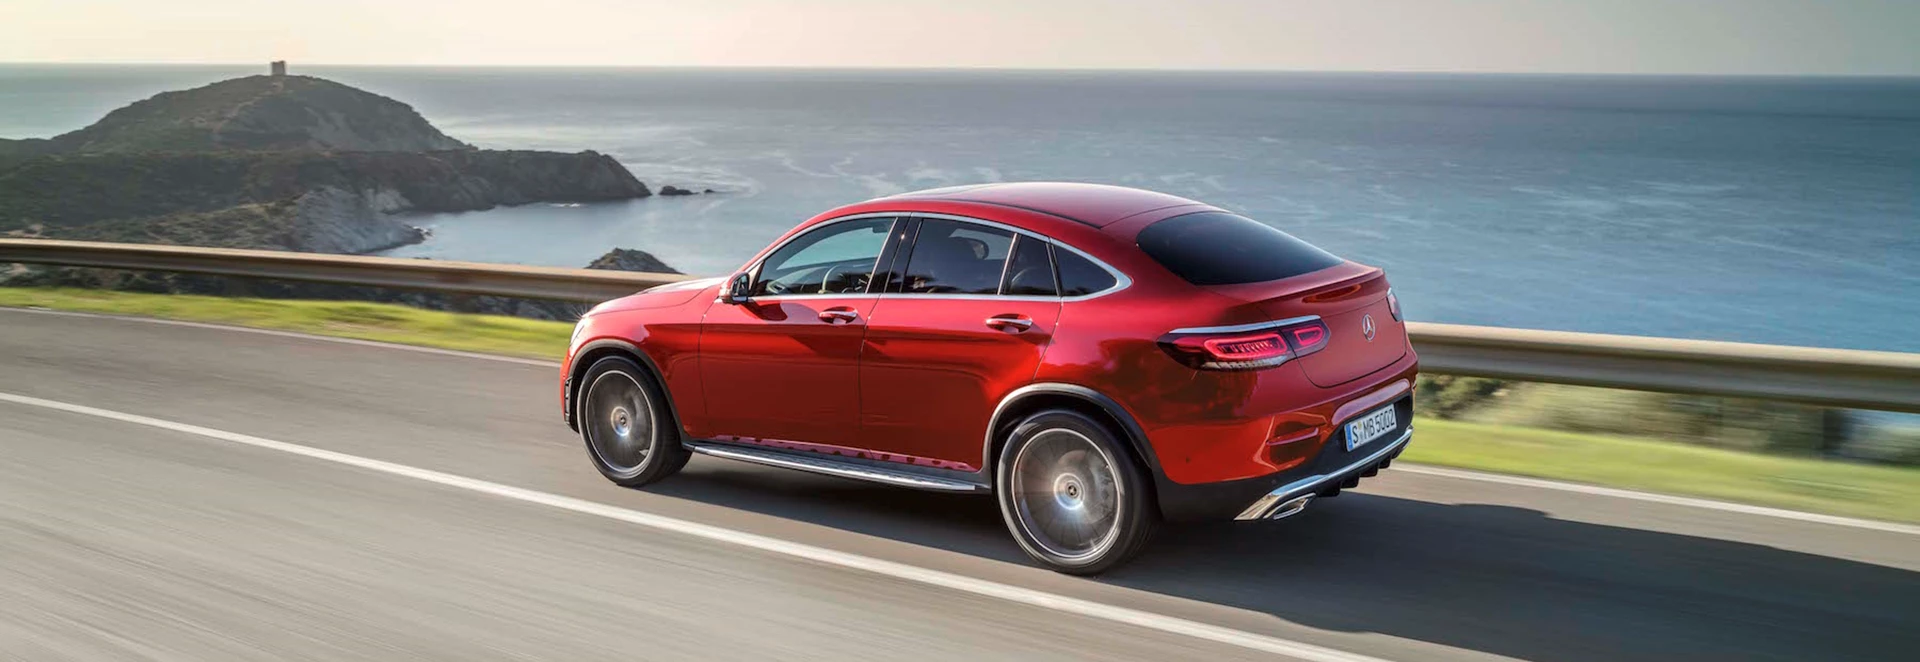 Pricing and specs revealed for Mercedes-Benz GLC and GLC Coupe